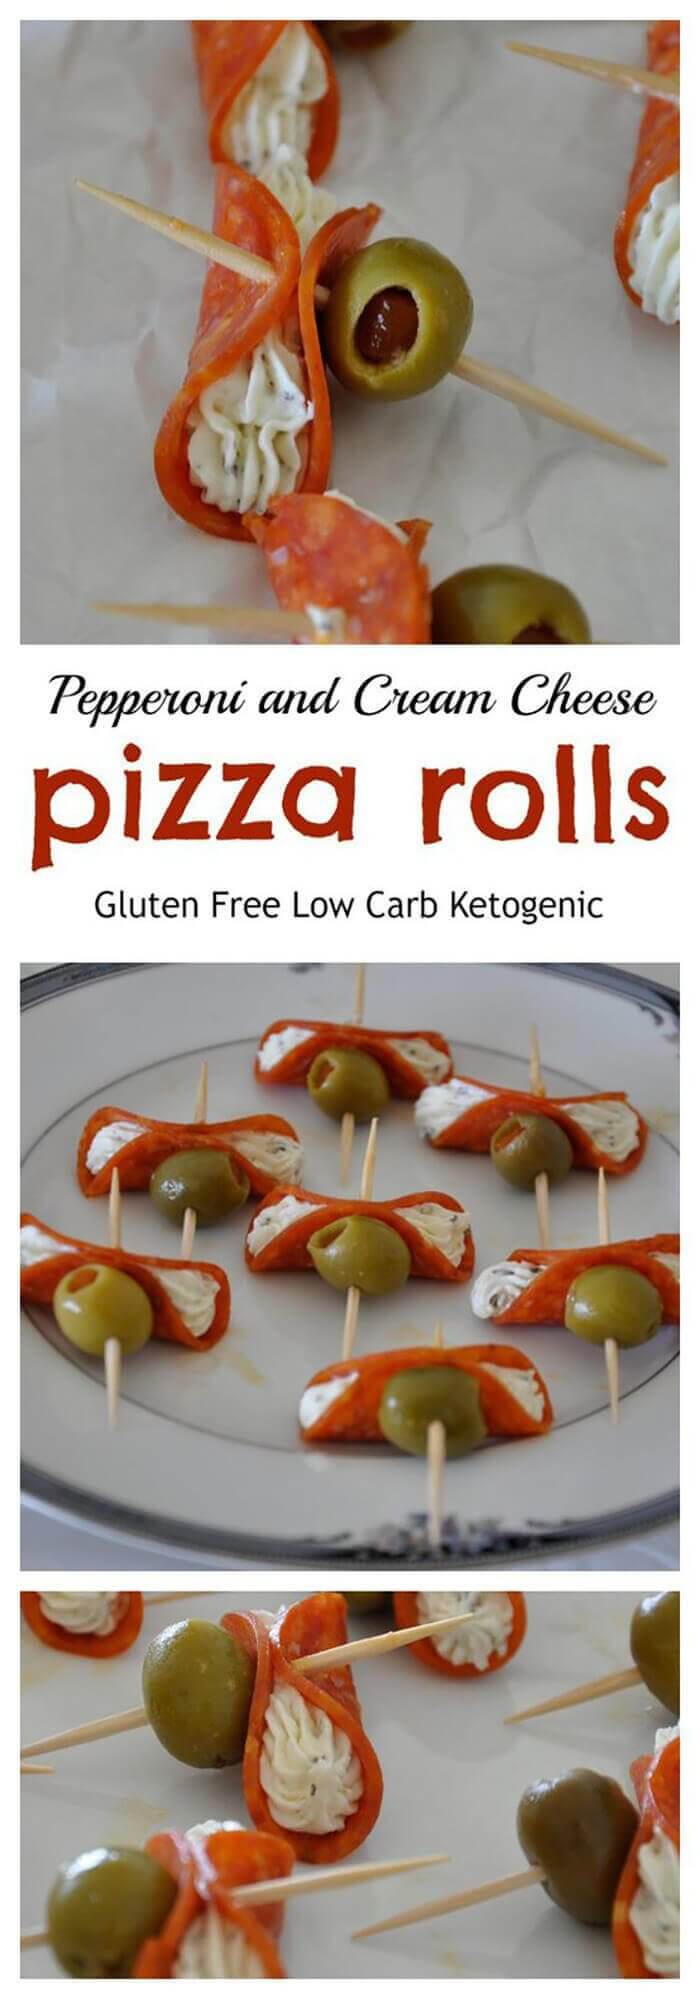 Pepperoni and Cream Cheese Pizza Rolls